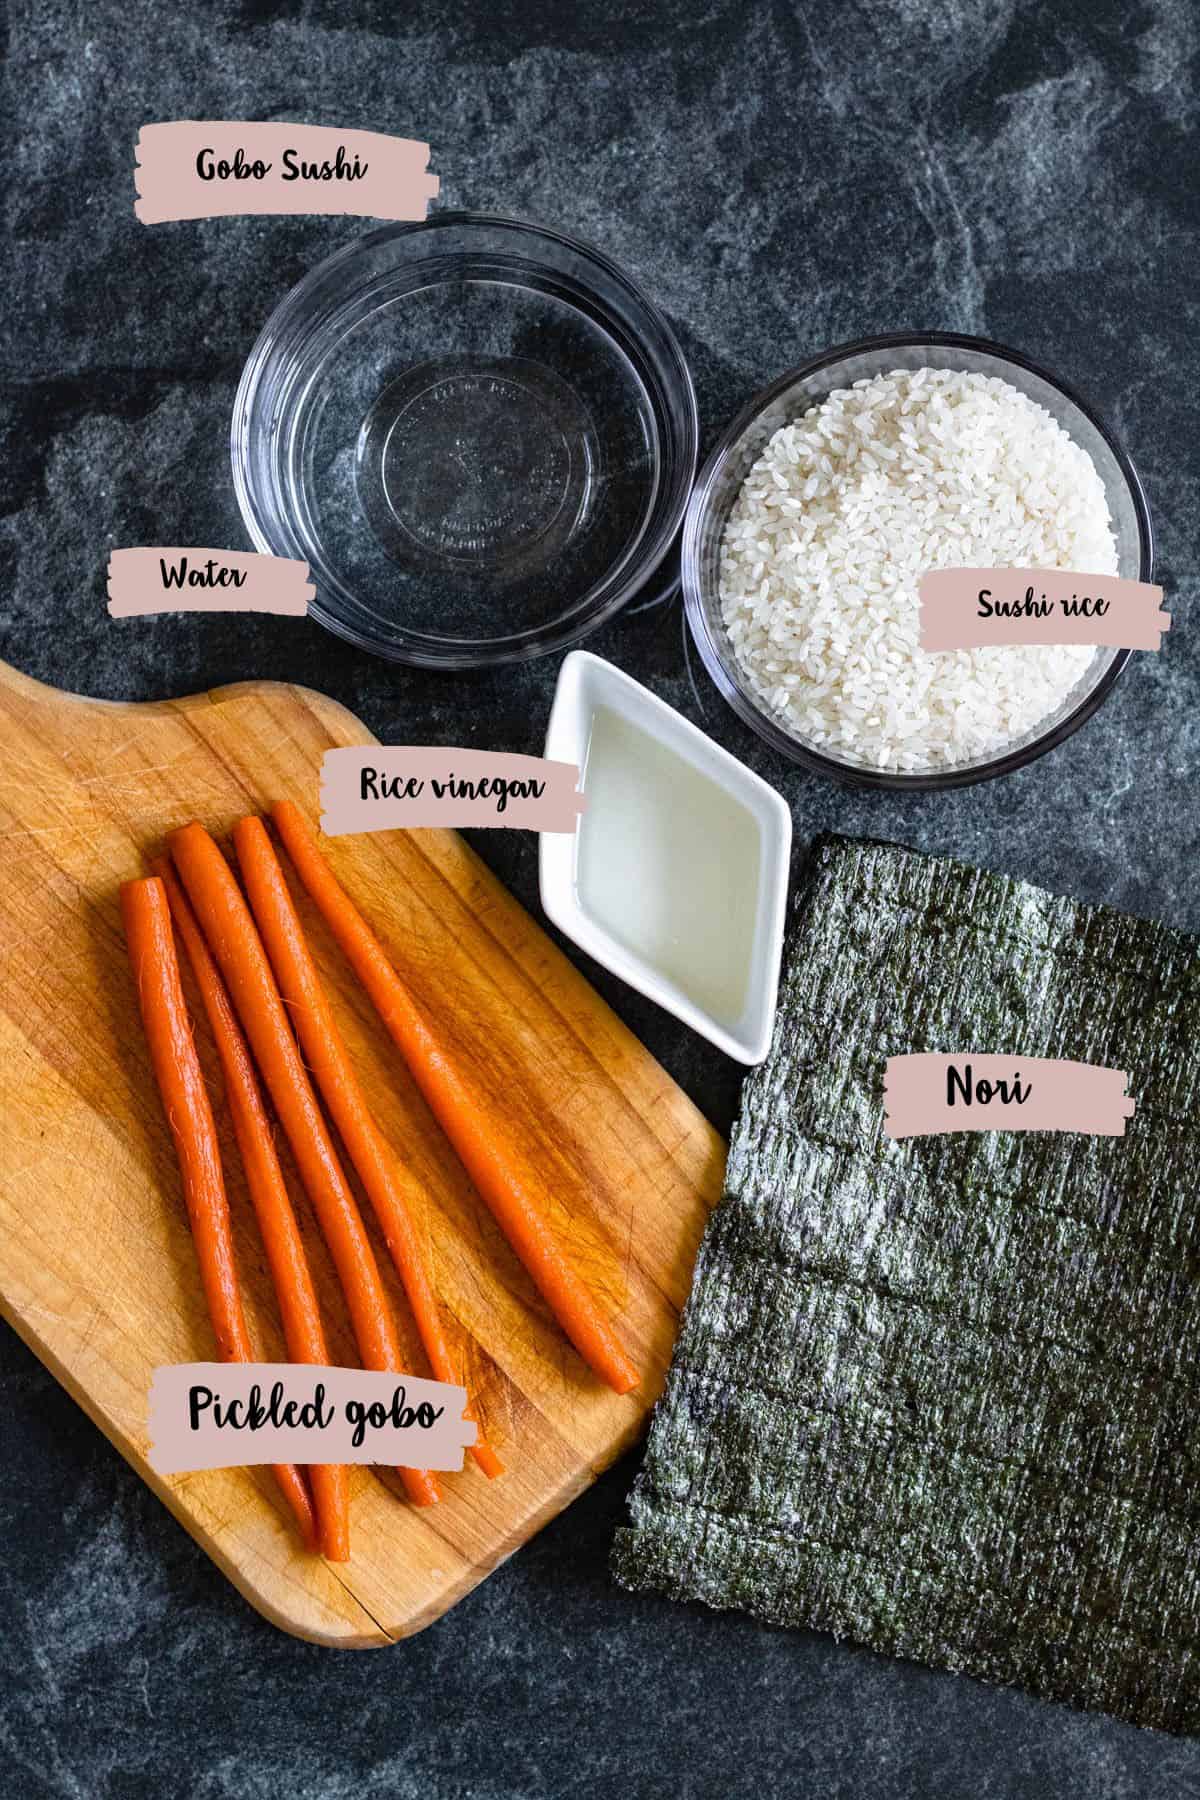 Ingredients shown needed to prepare Gobo sushi. 